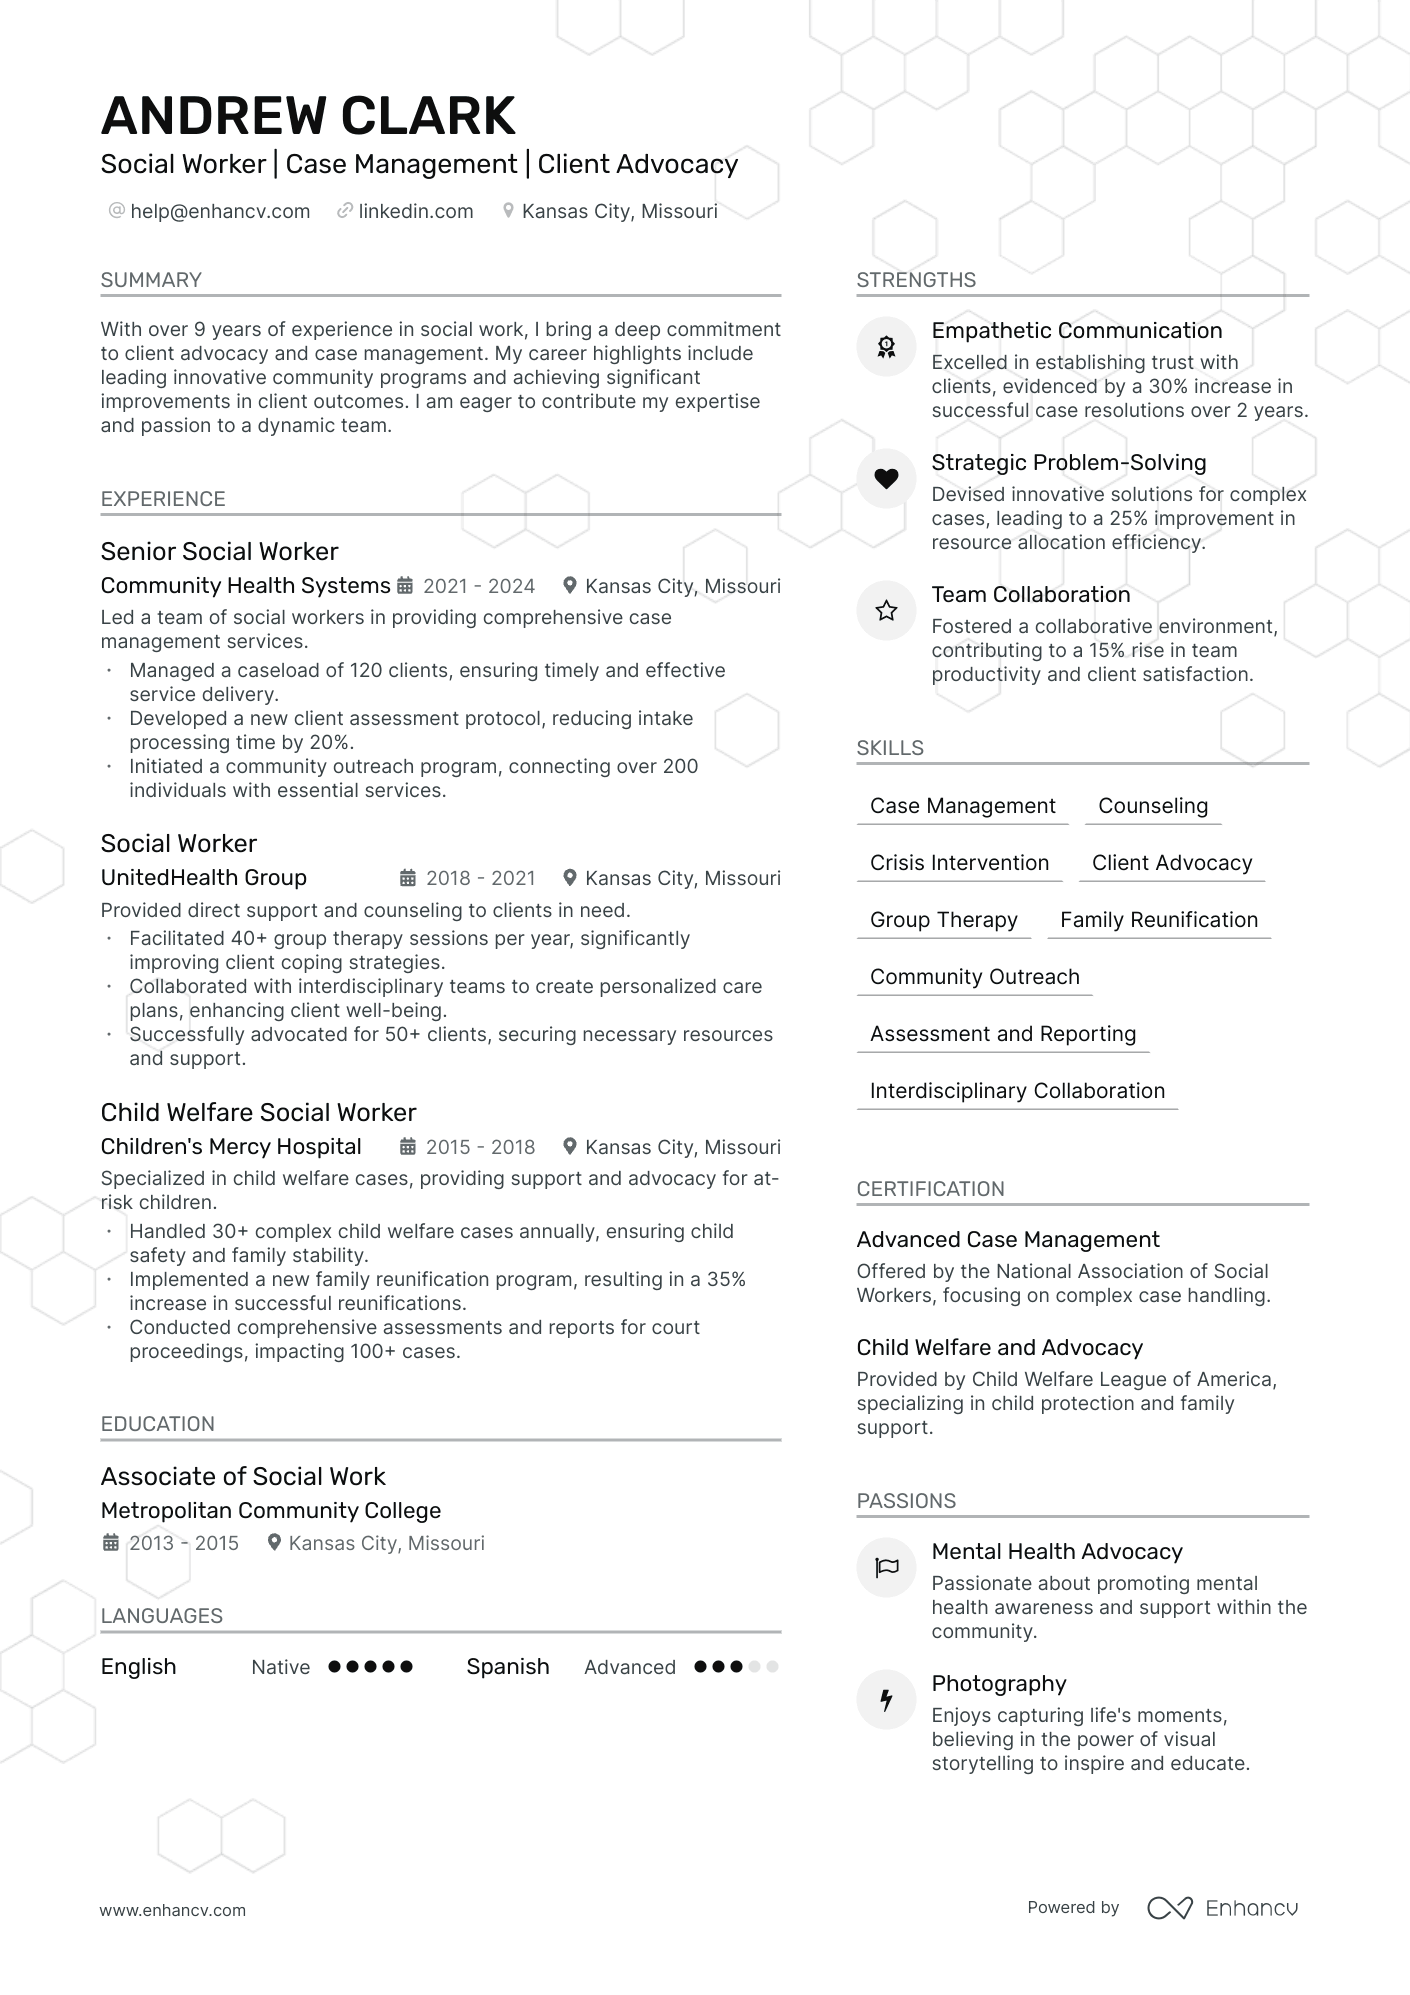 Social Worker | Case Management | Client Advocacy resume example